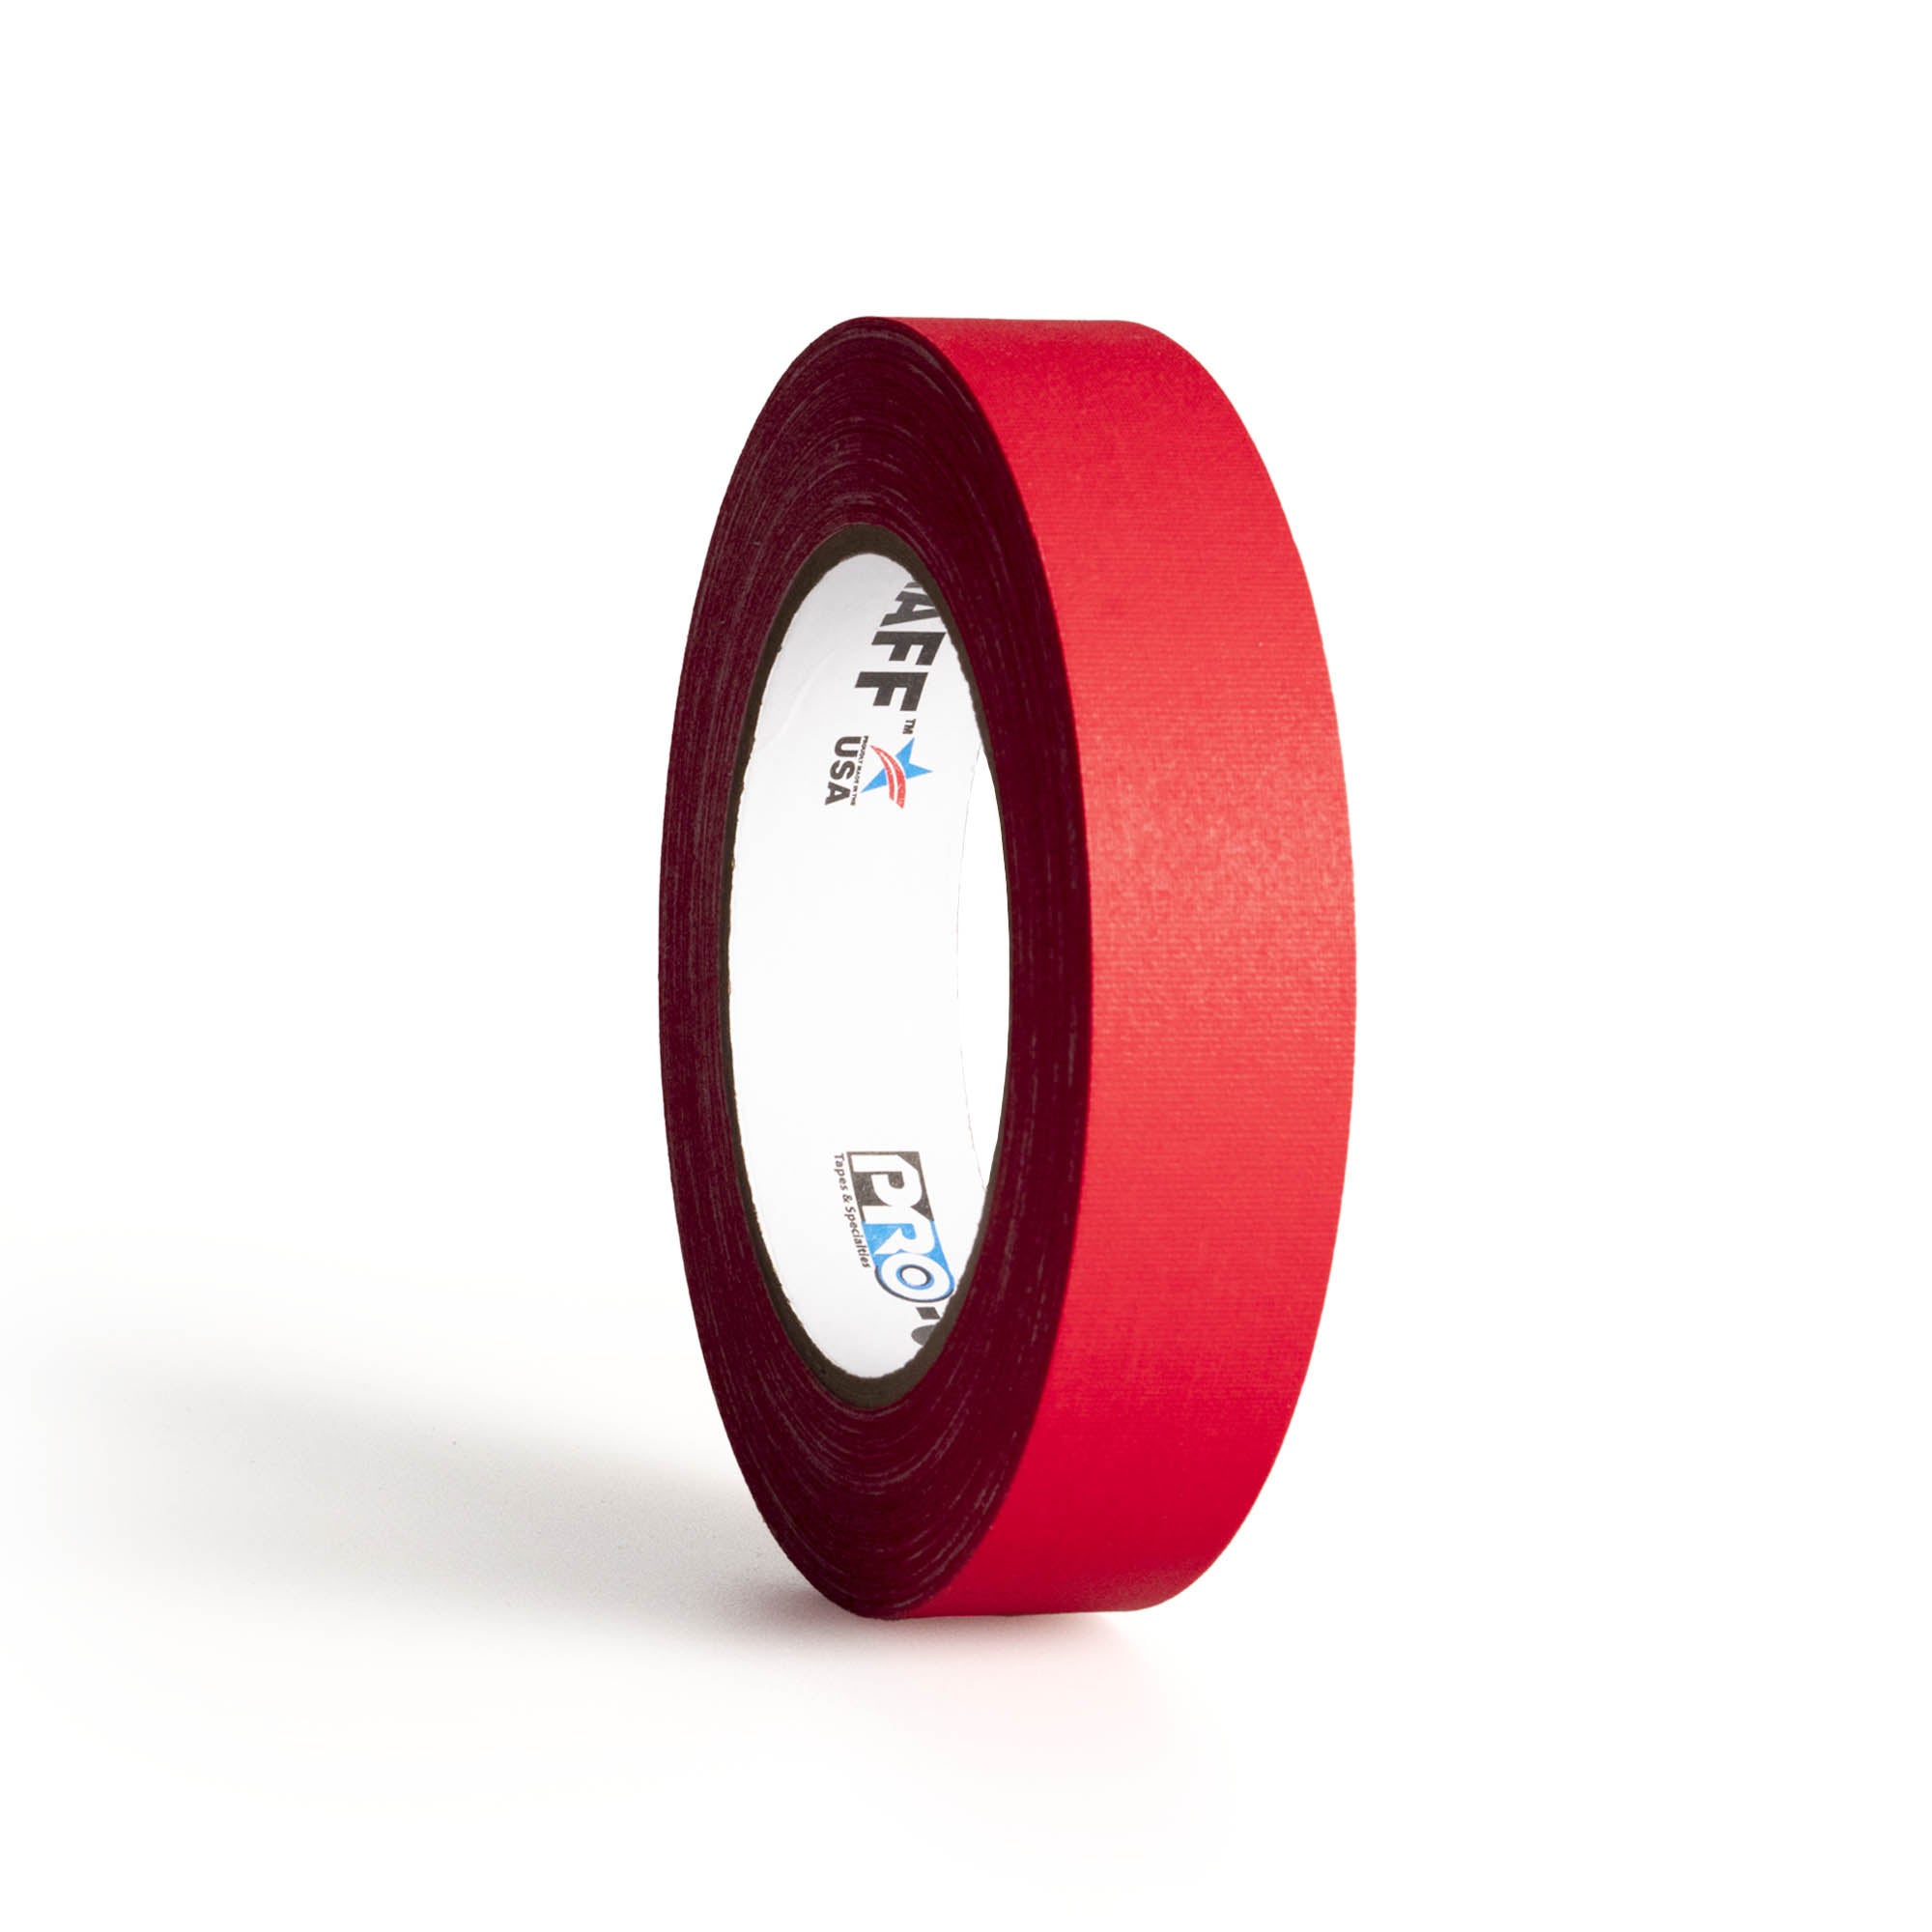 25m roll of pro gaff fabric adhesive tape in red standing up